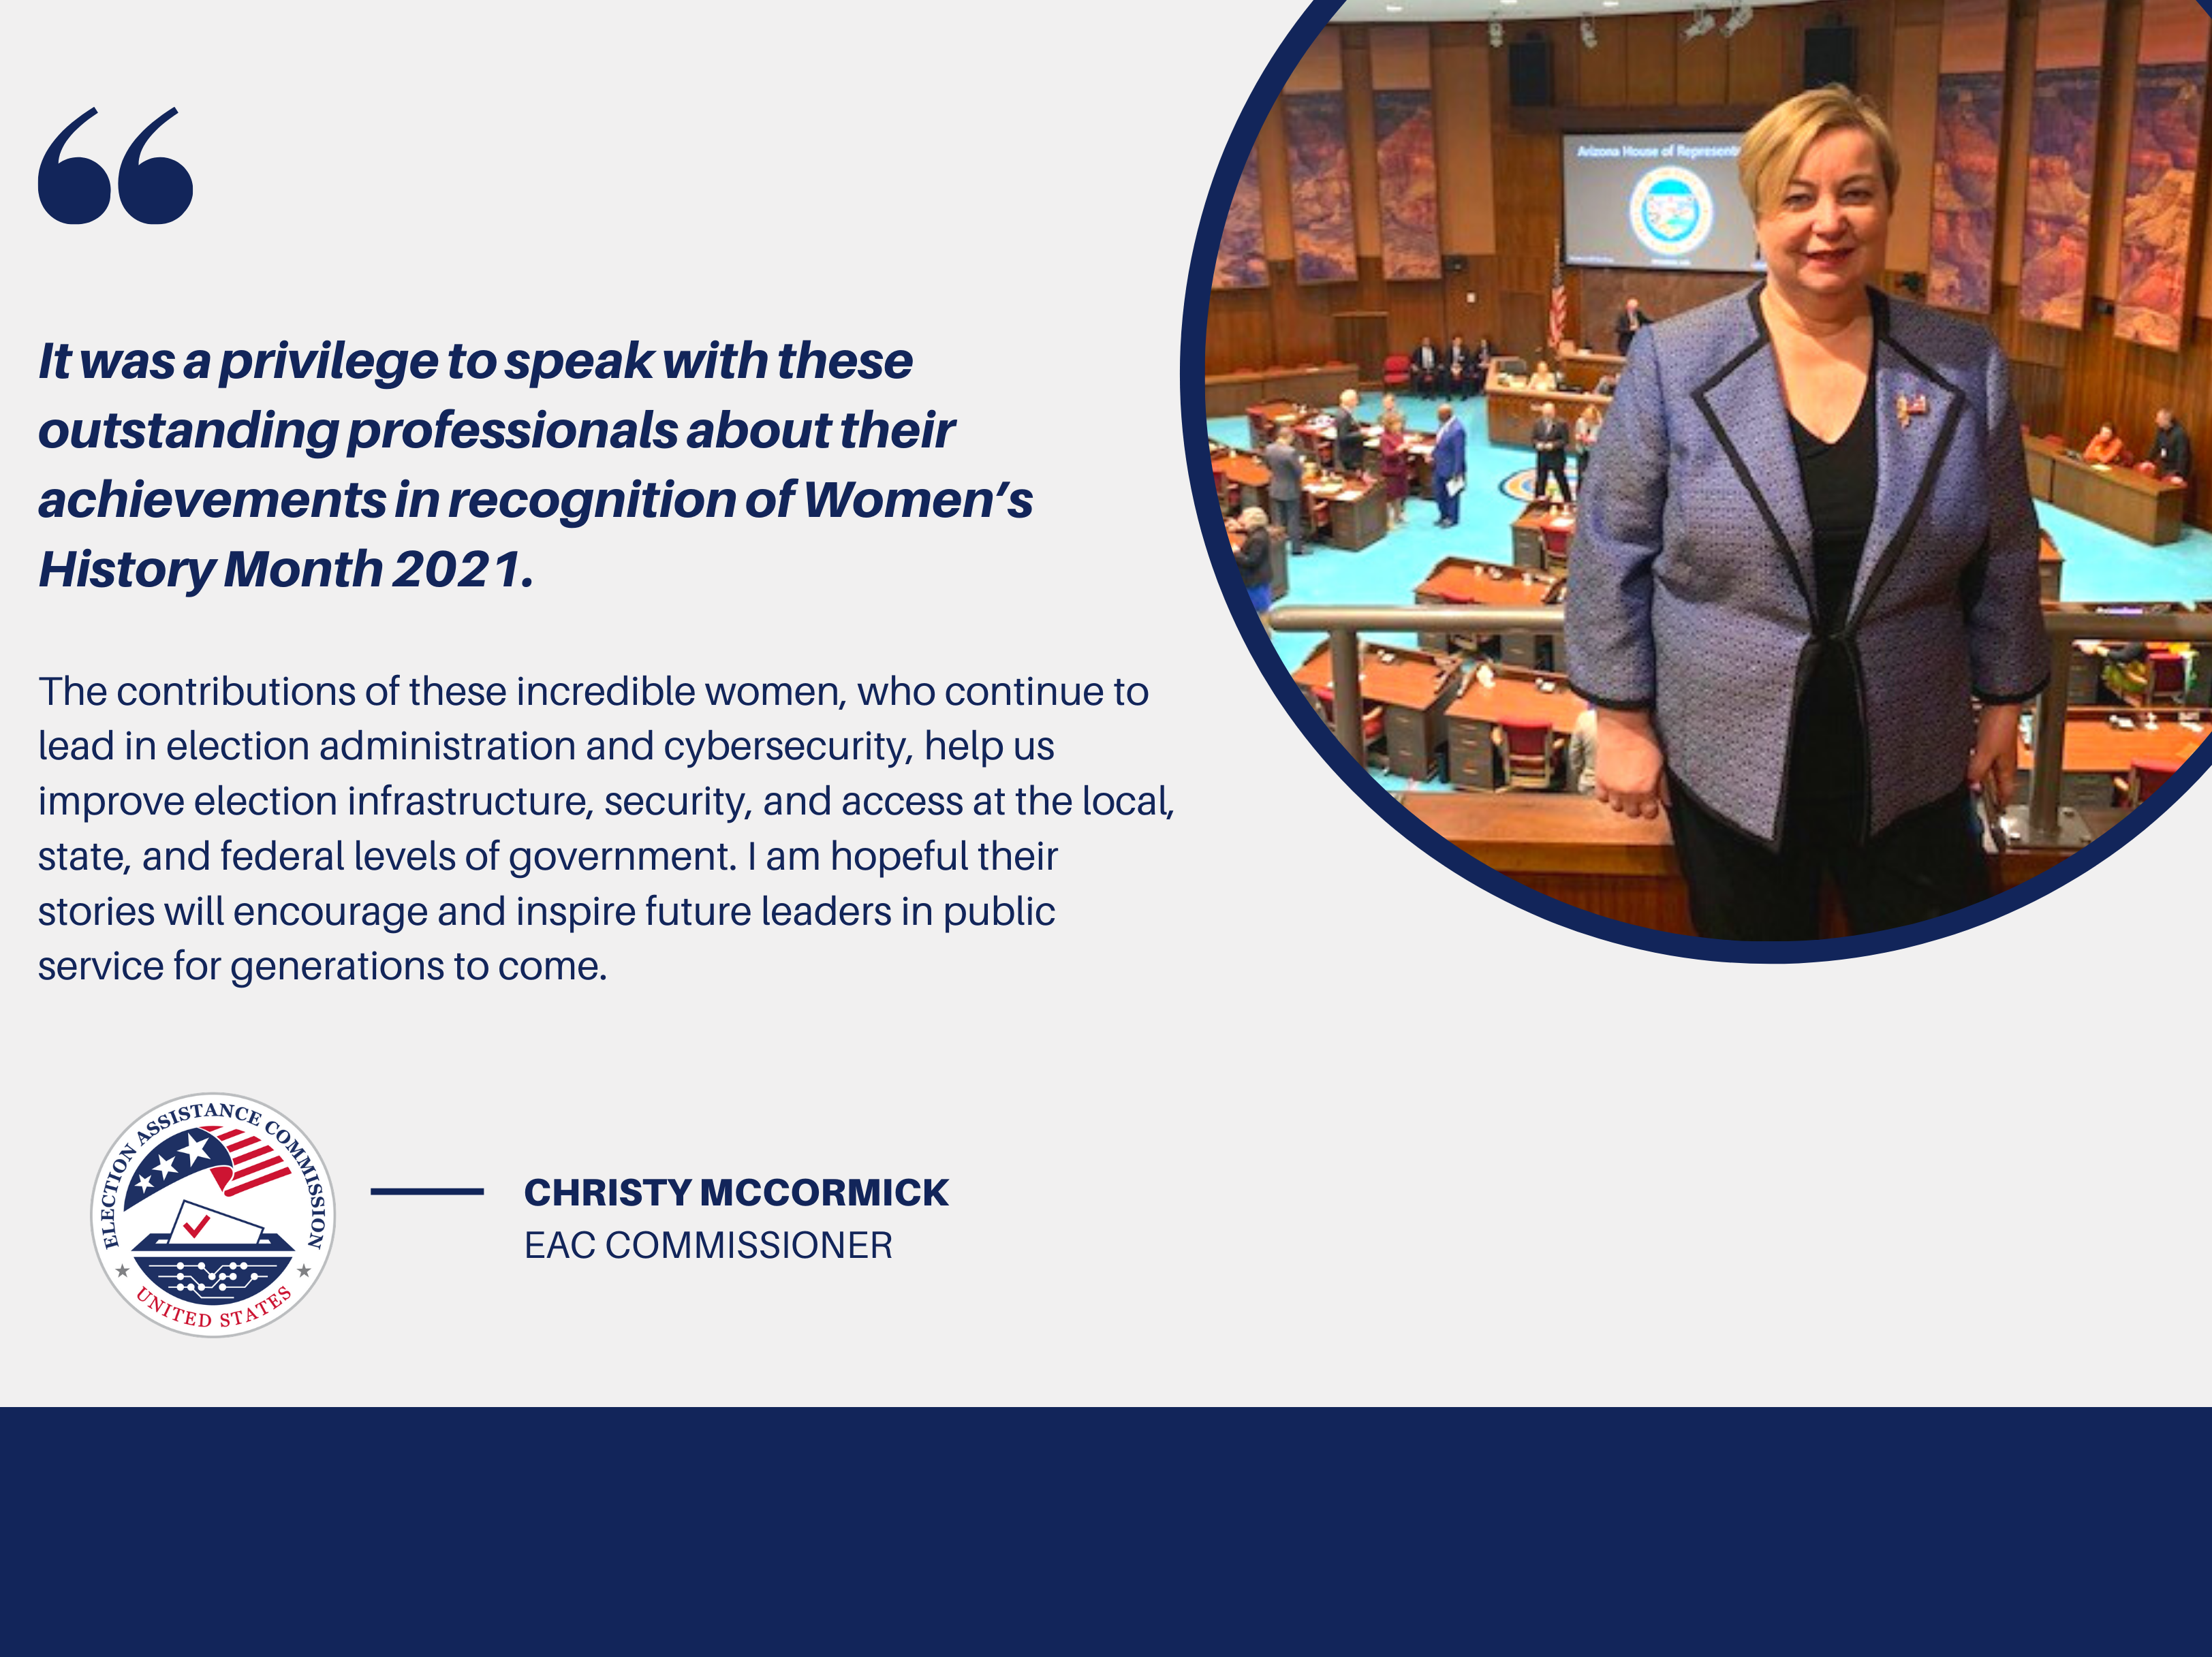 Image of EAC Commissioner Christy McCormick with a quote that says, "It was a privilege to speak with these outstanding professionals about their achievements in recognition of Women’s History Month 2021. The contributions of these incredible women, who continue to lead in the election administration and cybersecurity, help us improve election infrastructure, security, and access at the local, state, and federal levels of government. I am hopeful their stories will encourage and inspire future leaders..."